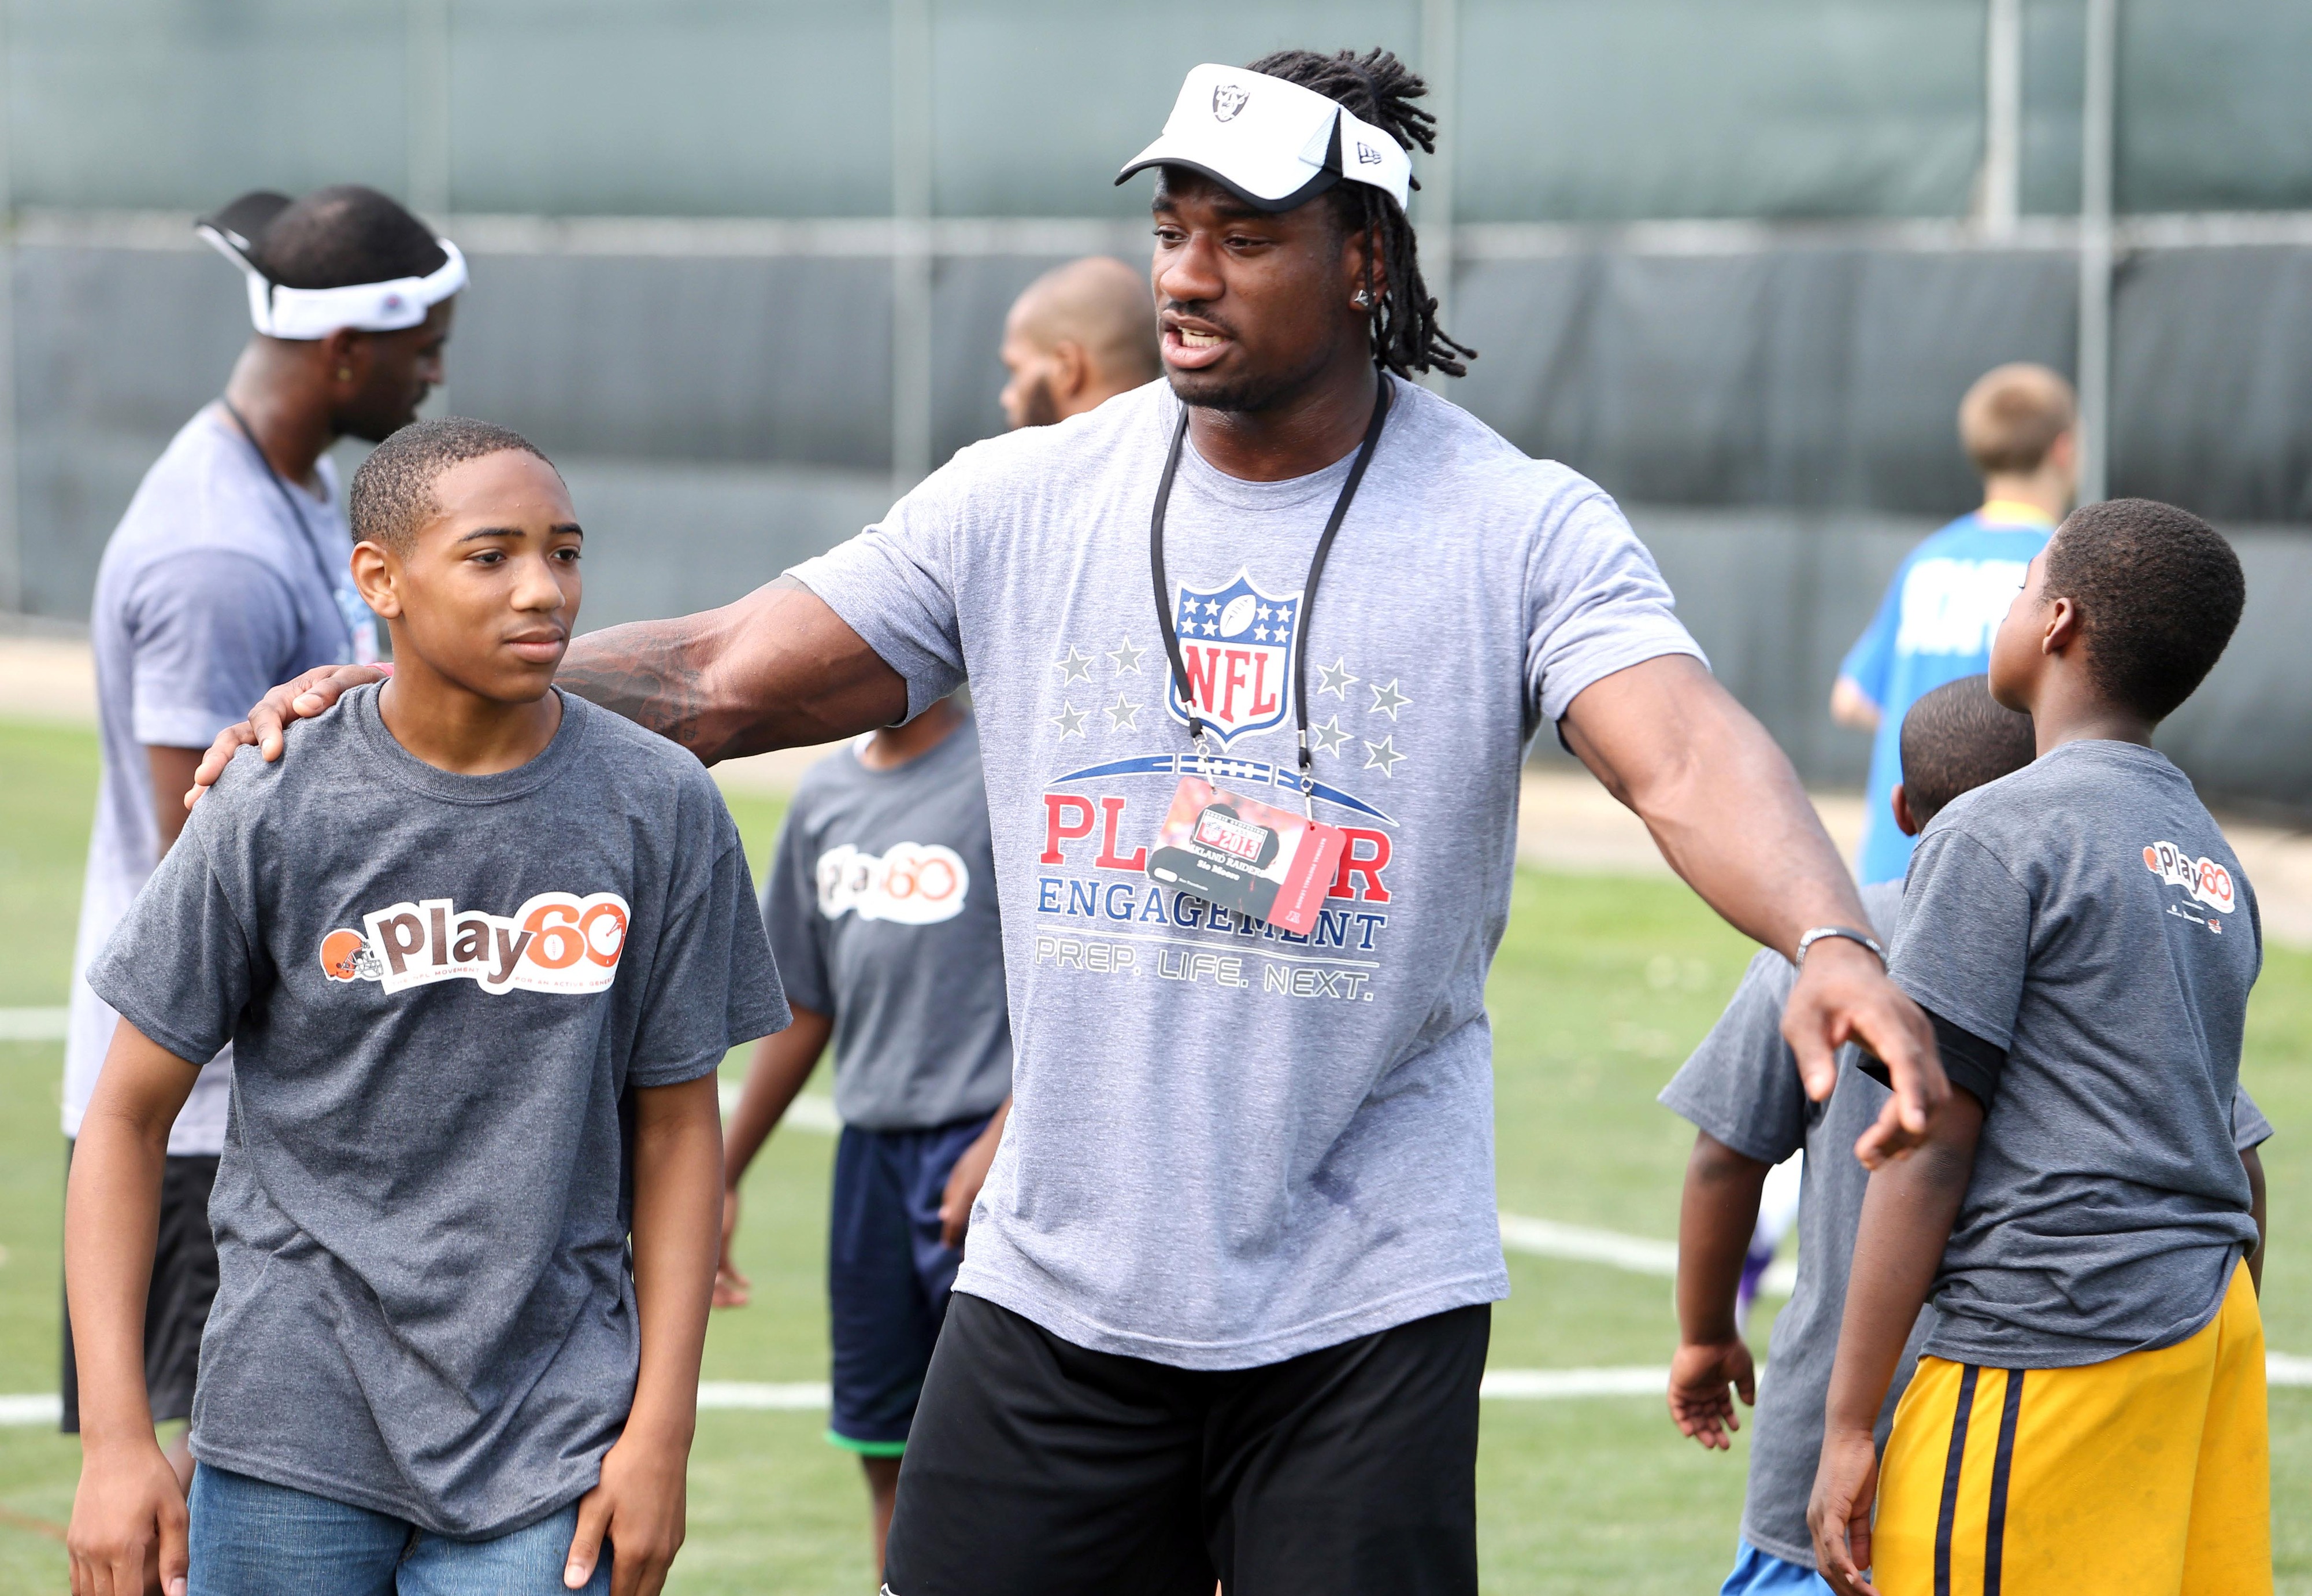 Oakland Raiders linebacker Sio Moore engaging in NFL Play 60 at the 2013 Rookie Symposium